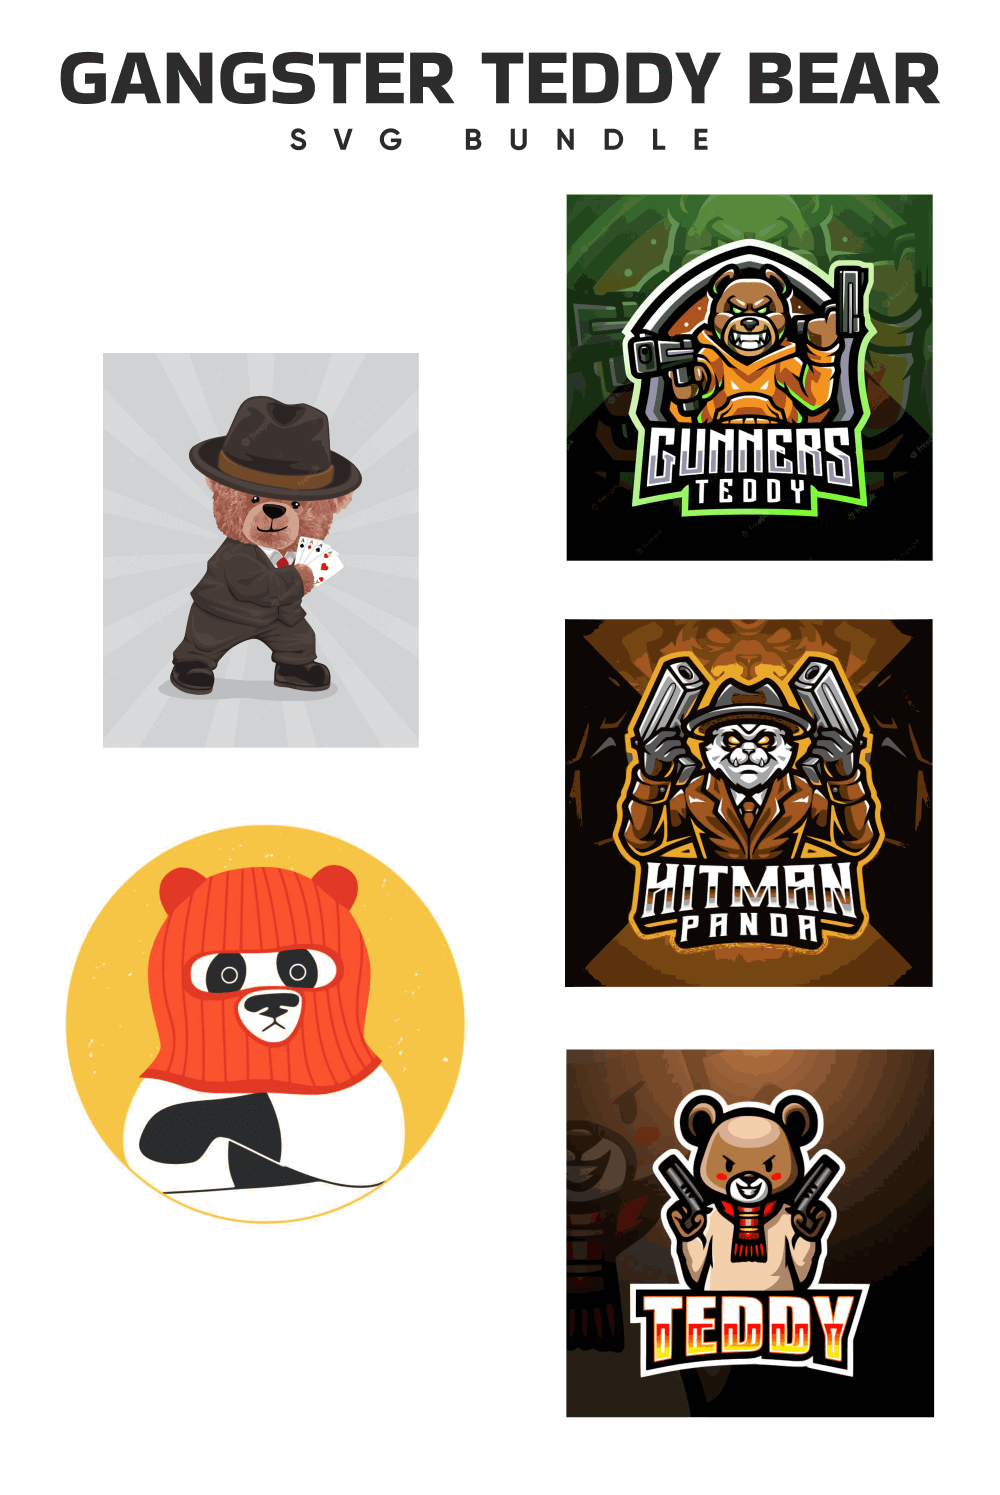 The gangster teddy bear logo is shown in four different colors.